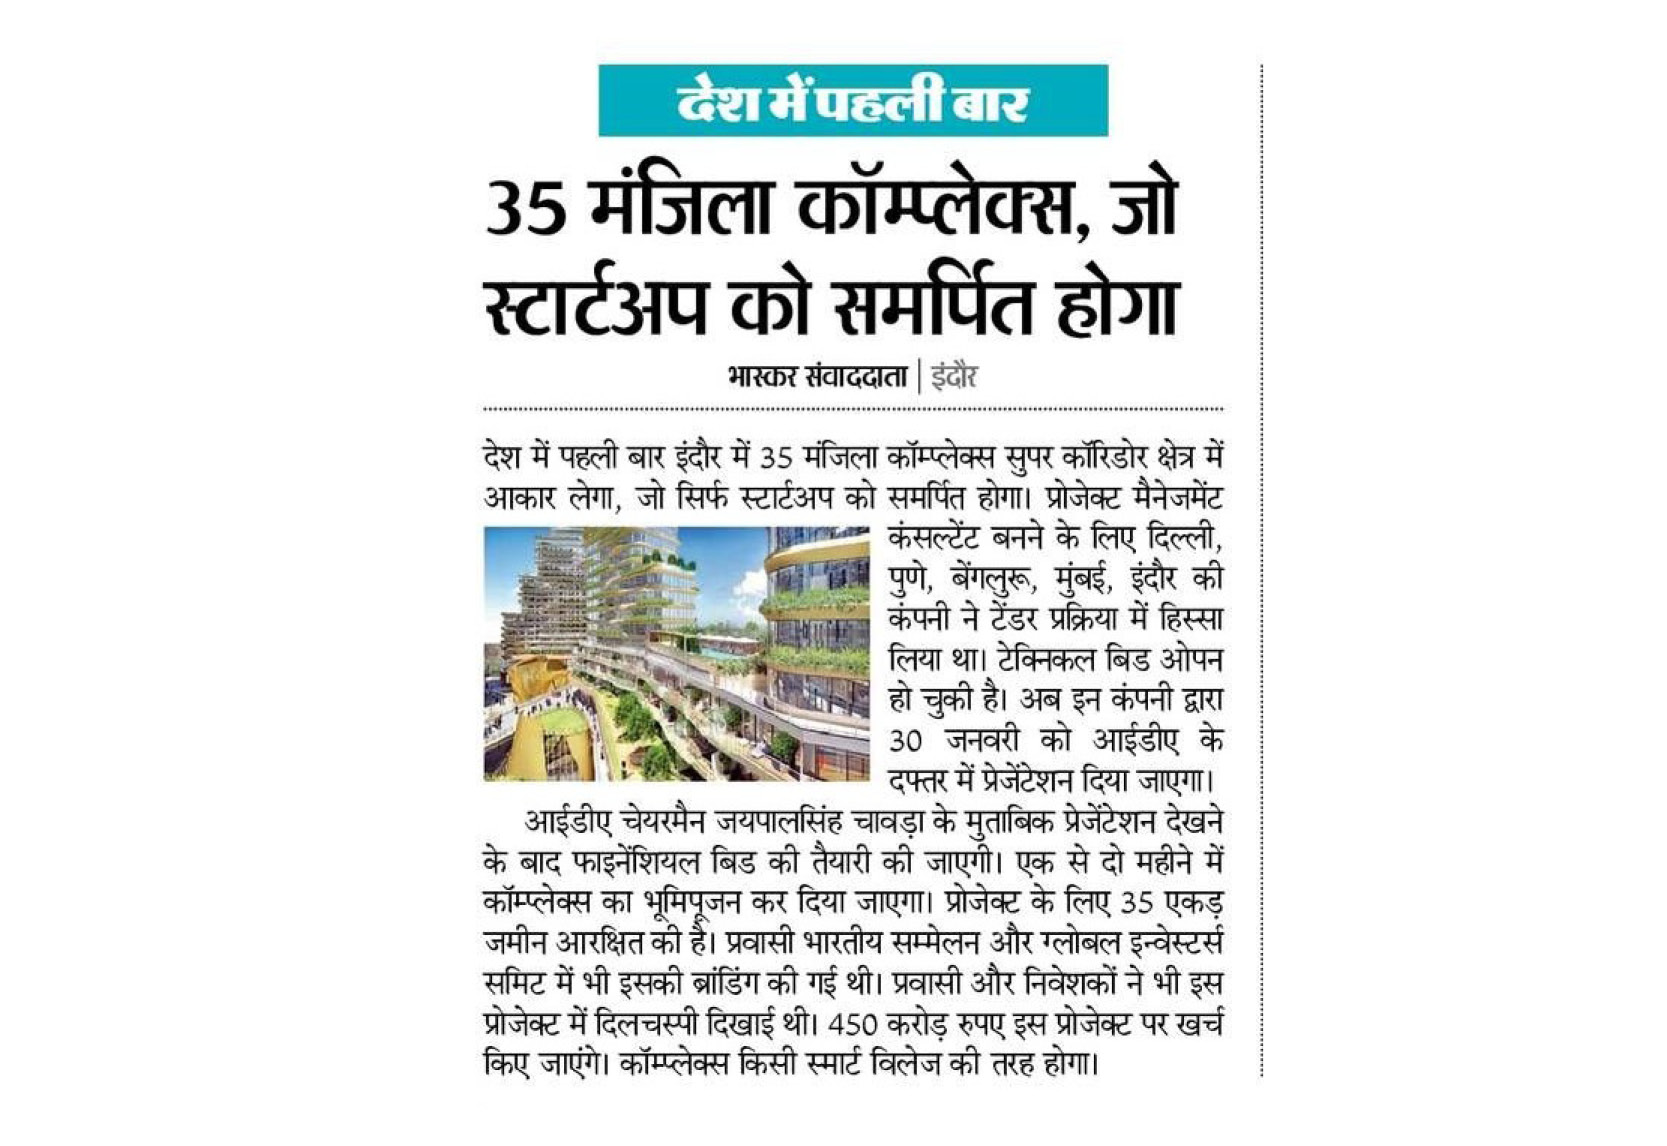 35 storeyed complex on Super corridor, dedicated to startup and incubation